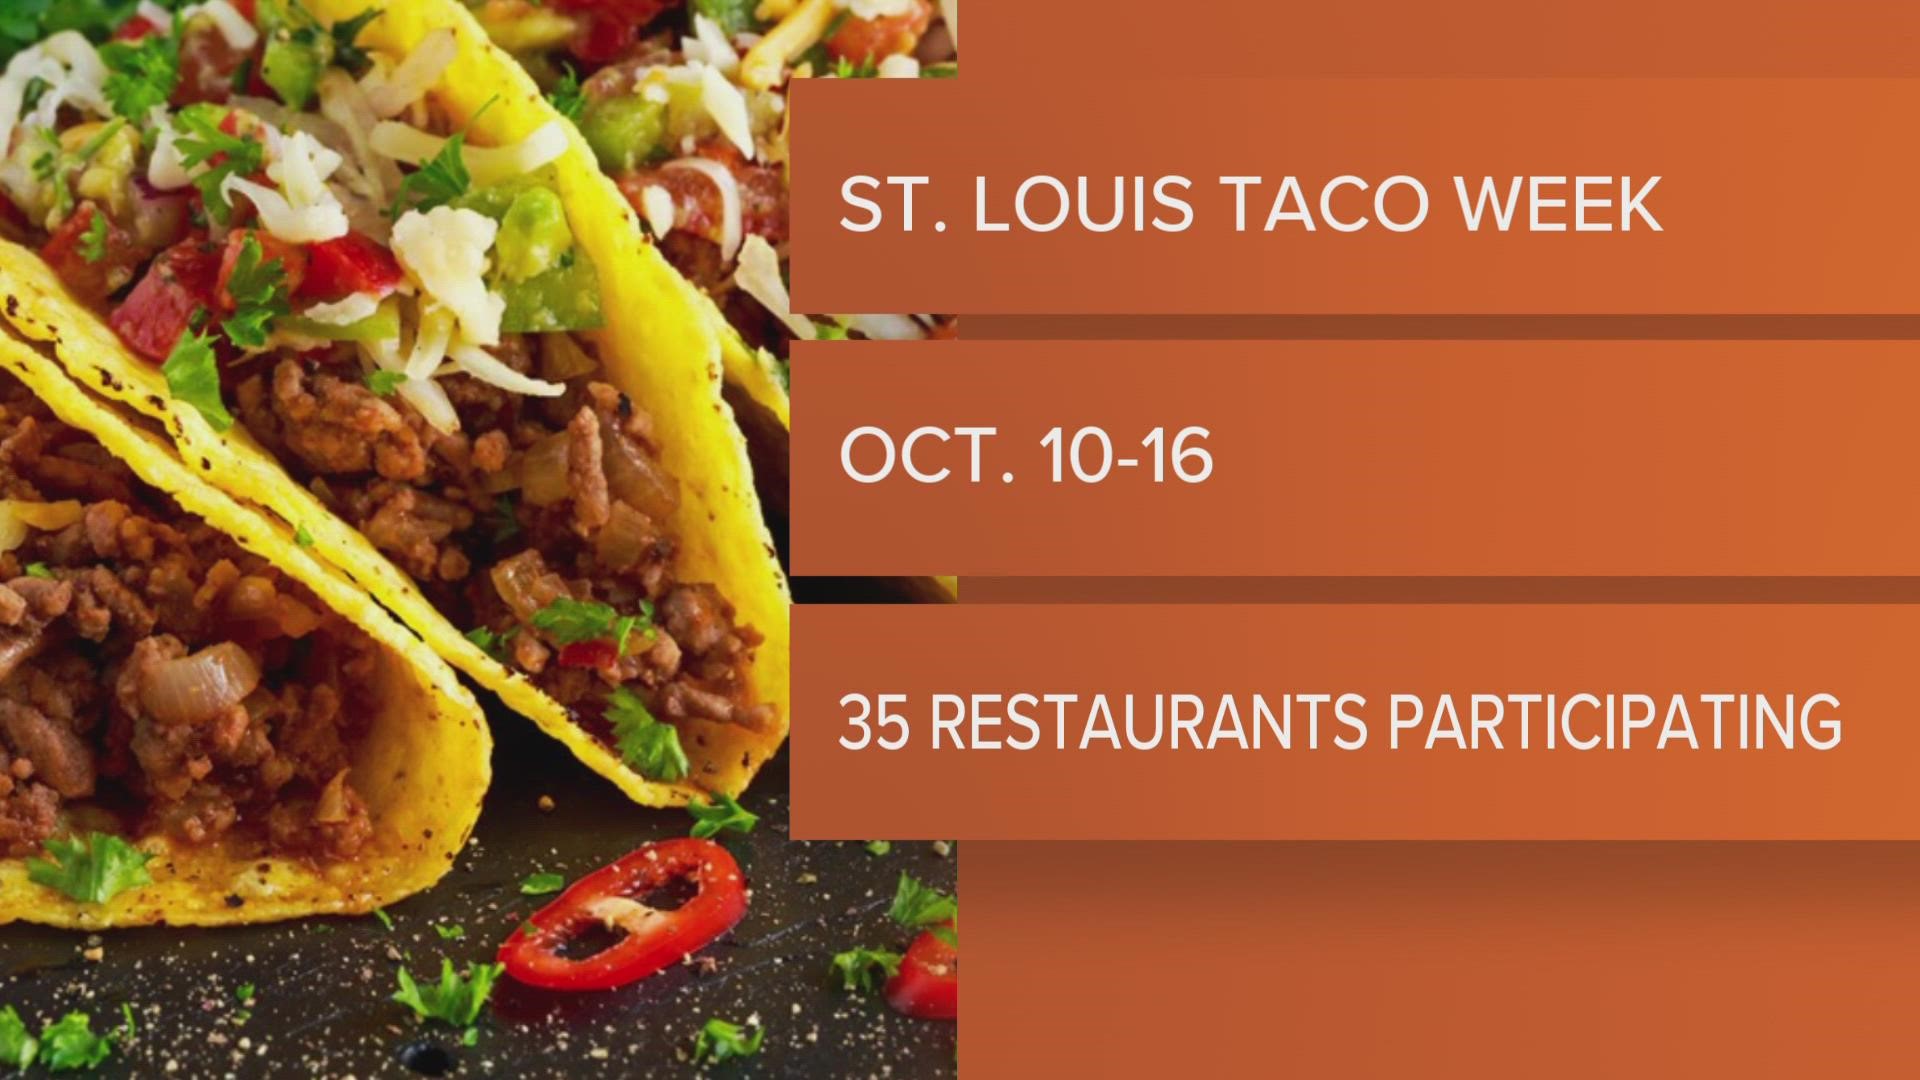 From Oct. 10- Oct. 16, 35 restaurants in the St. Louis area will be serving up their own creative take on a taco.